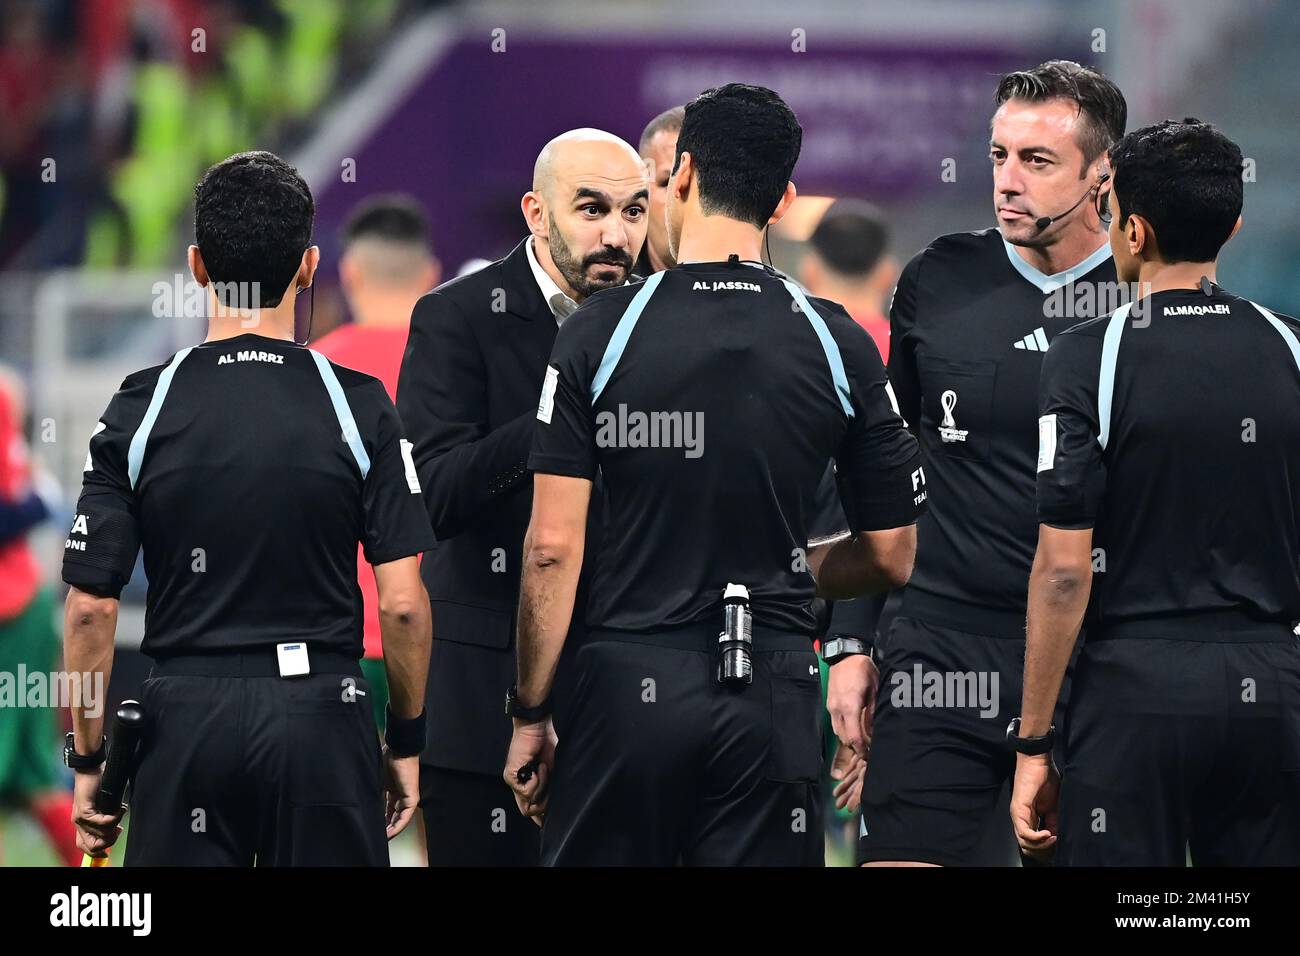 DOHA, QATAR - DECEMBER 17: Walid Regragui head coach of Morocco argues with the Referee Abdulrahman Al-Jassim ,during the FIFA World Cup Qatar 2022 3rd Place match between Croatia and Morocco at Khalifa International Stadium on December 17, 2022 in Doha, Qatar. (Photo by MB Media) Stock Photo